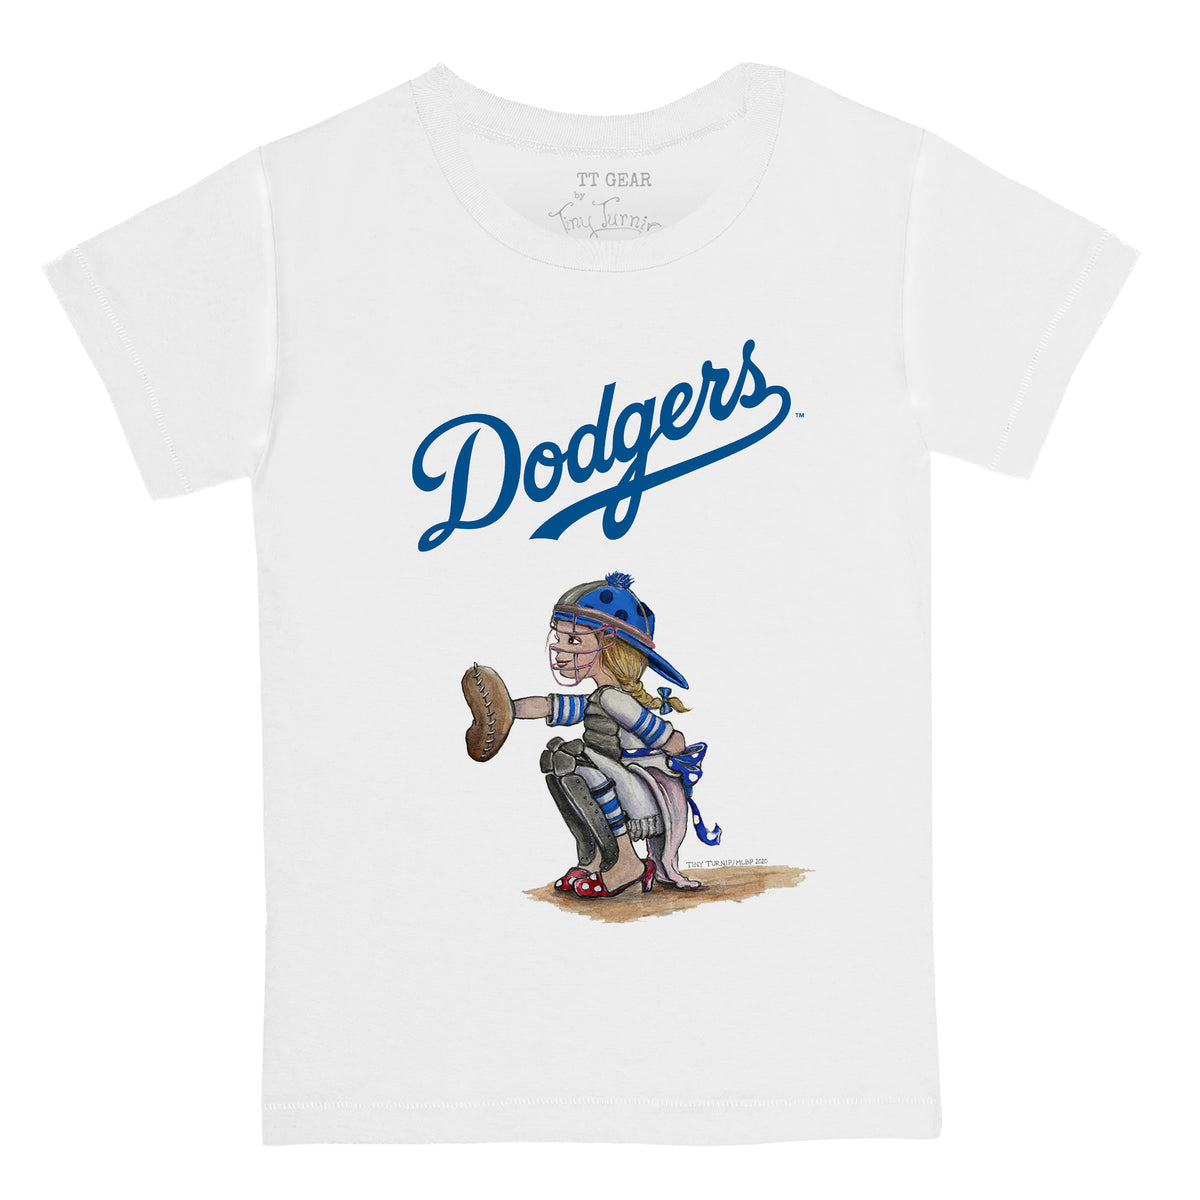 Los Angeles Dodgers Kate the Catcher Tee Shirt